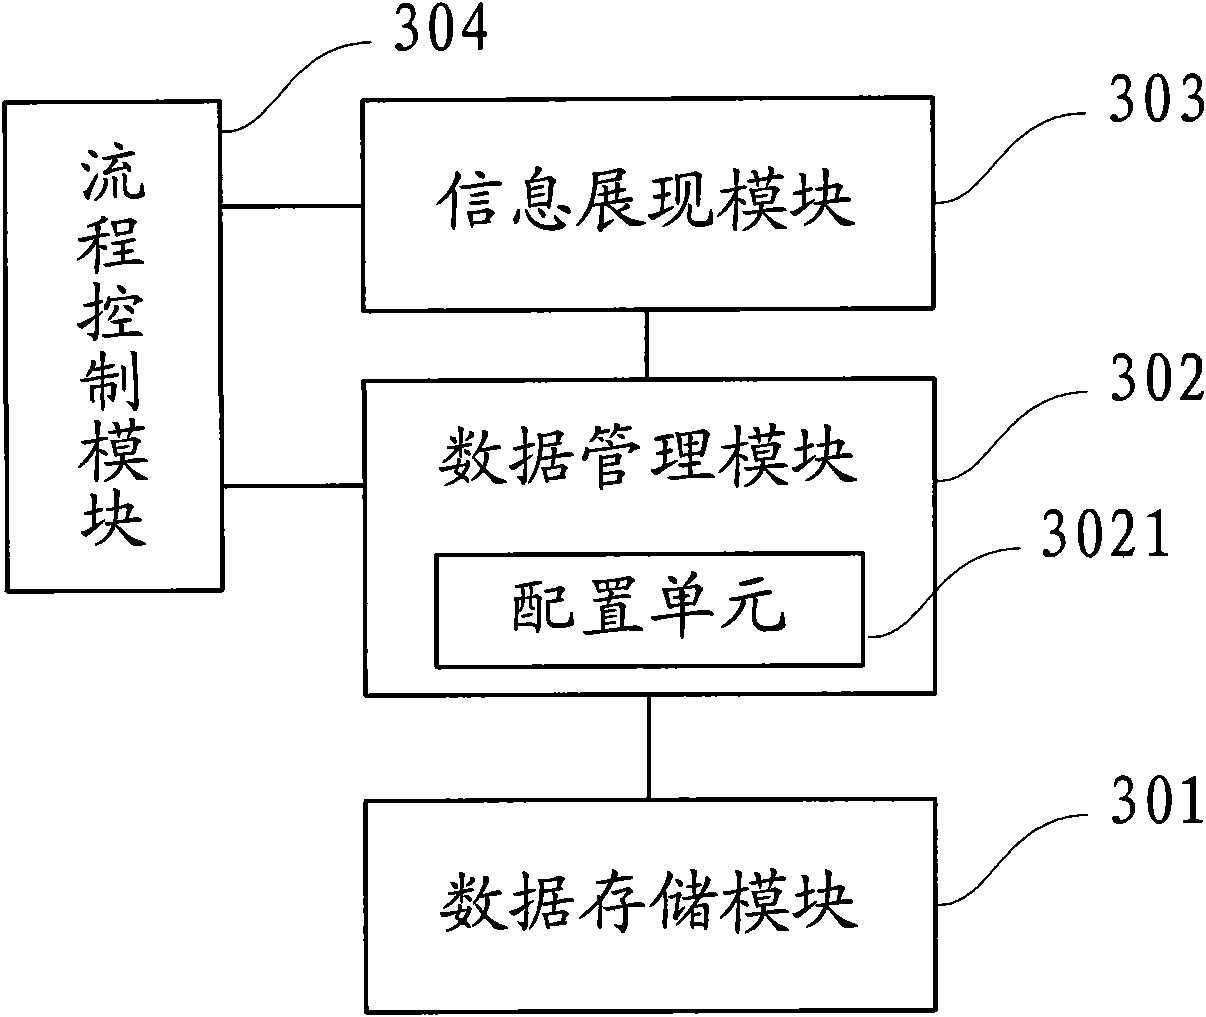 Show method of cell-phone address book and cell phone utilizing same